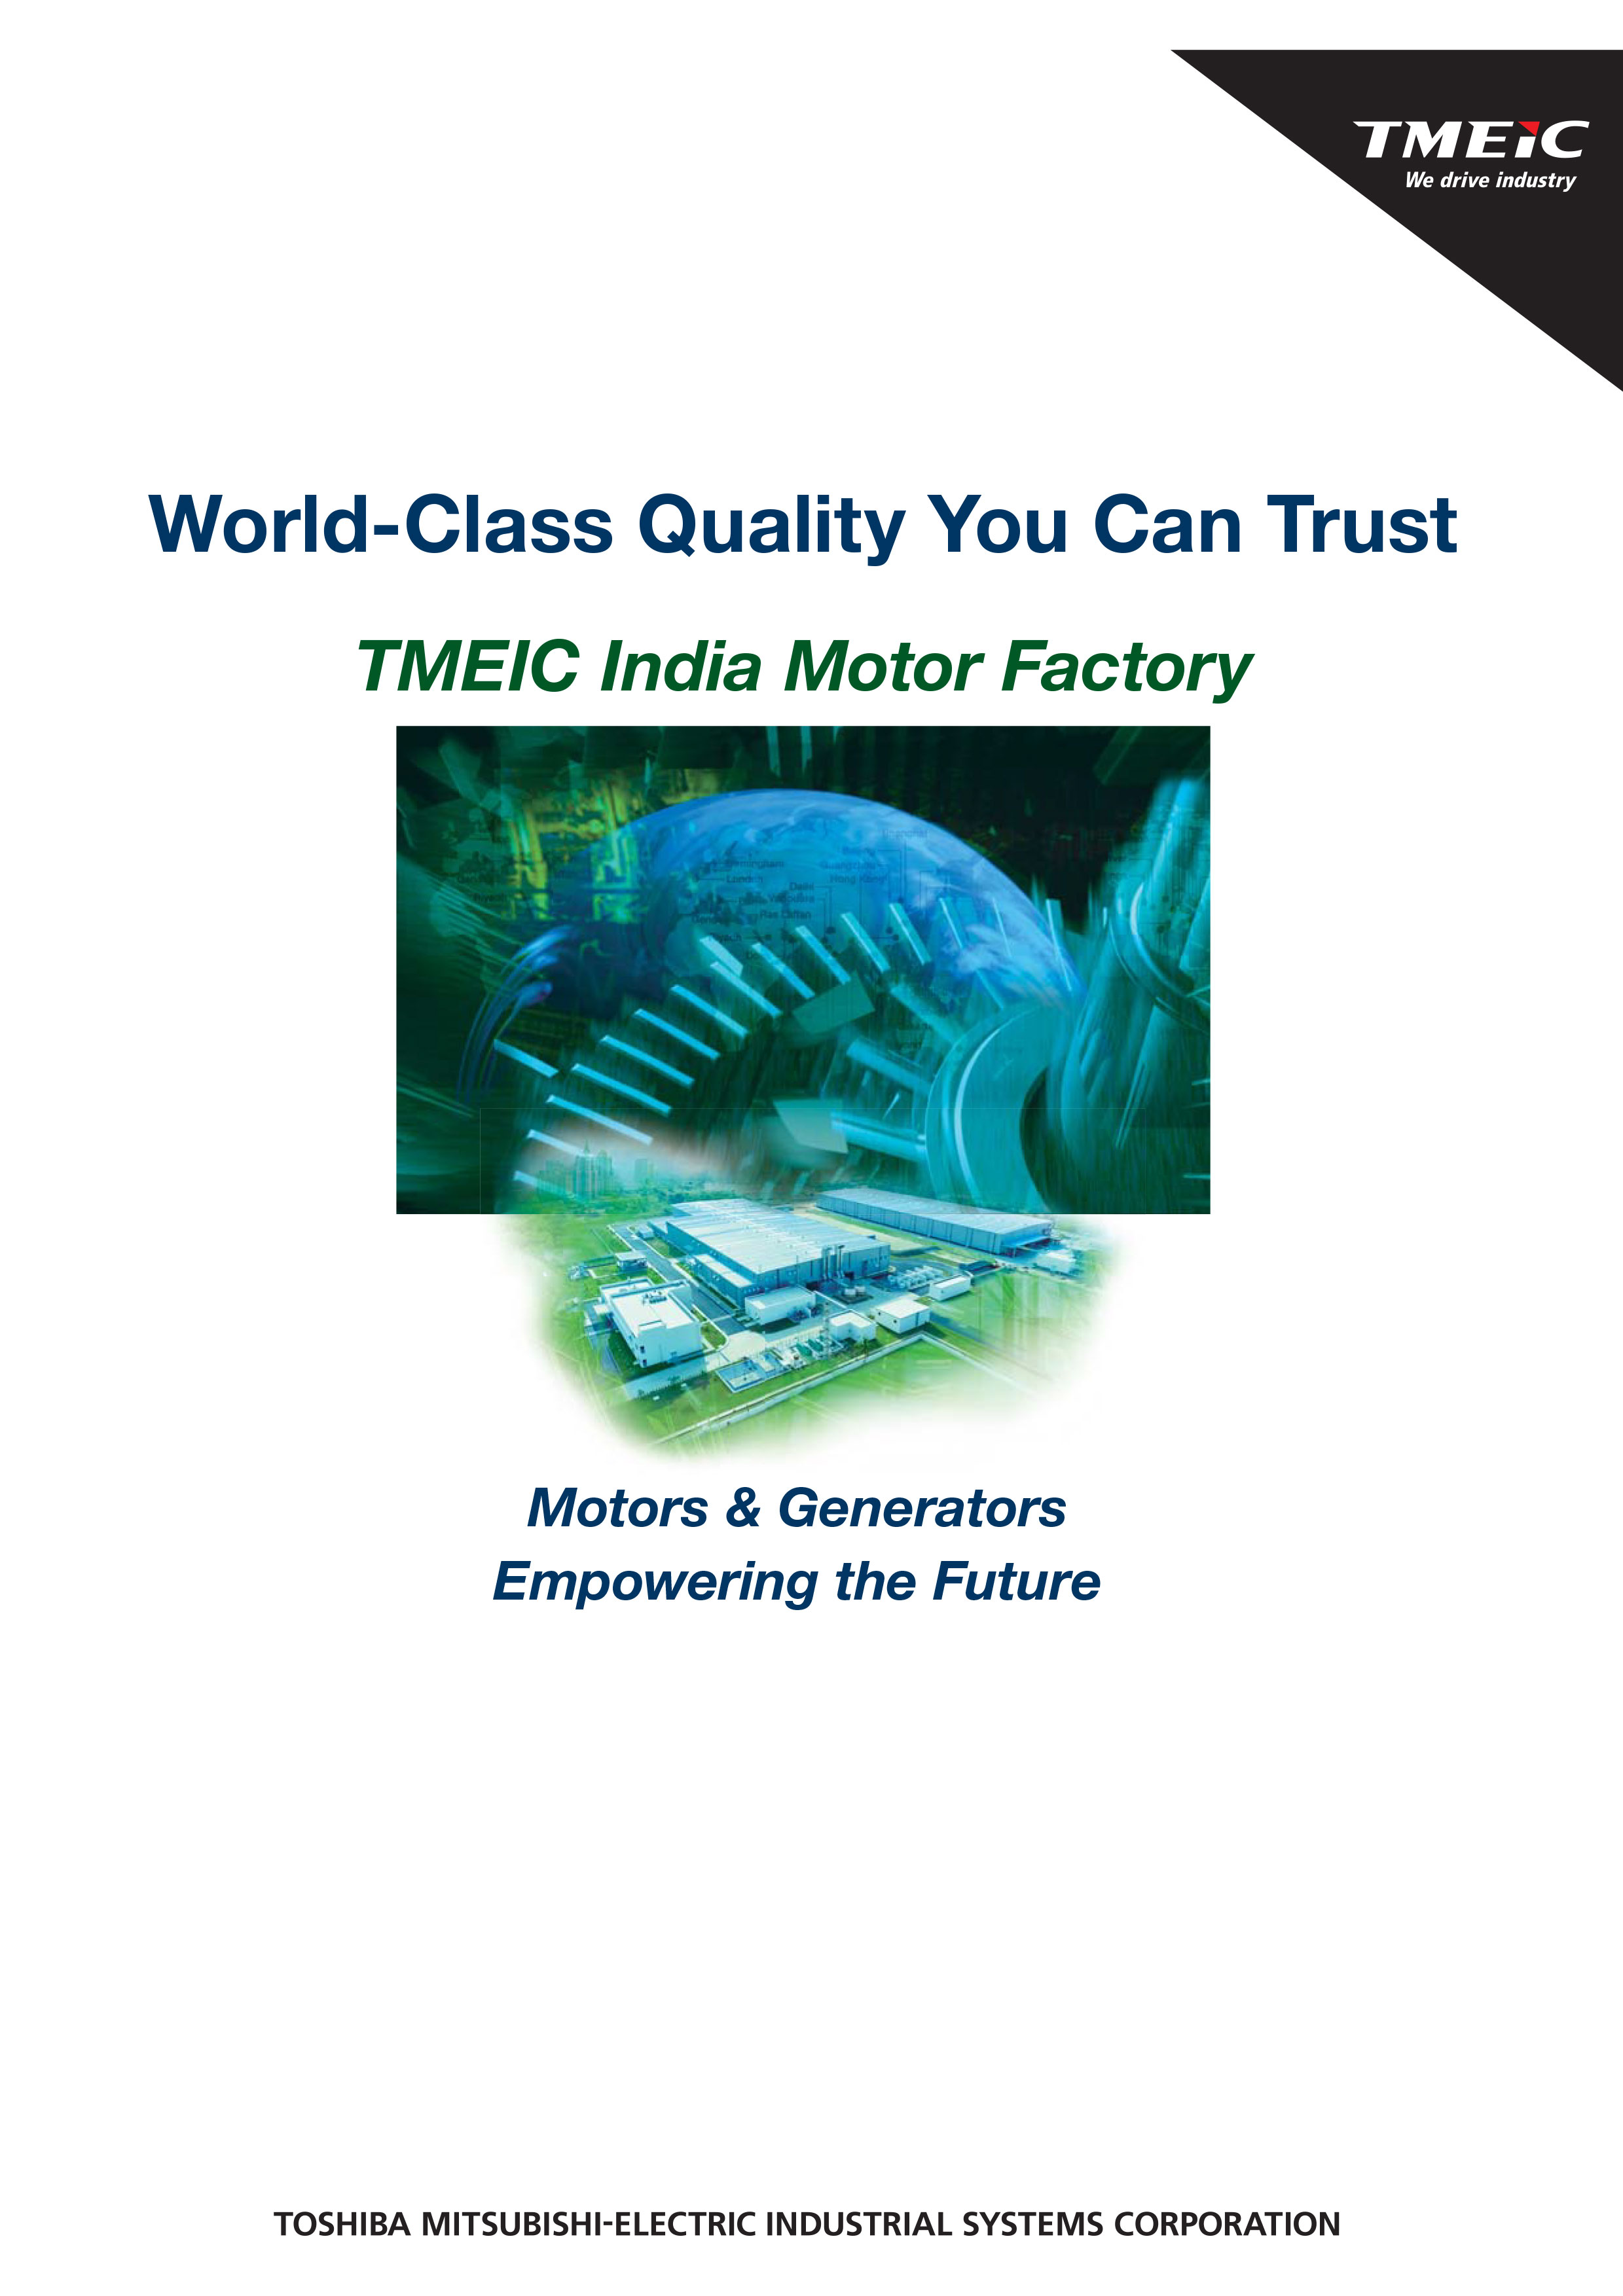 >TMEIC India Motor Factory